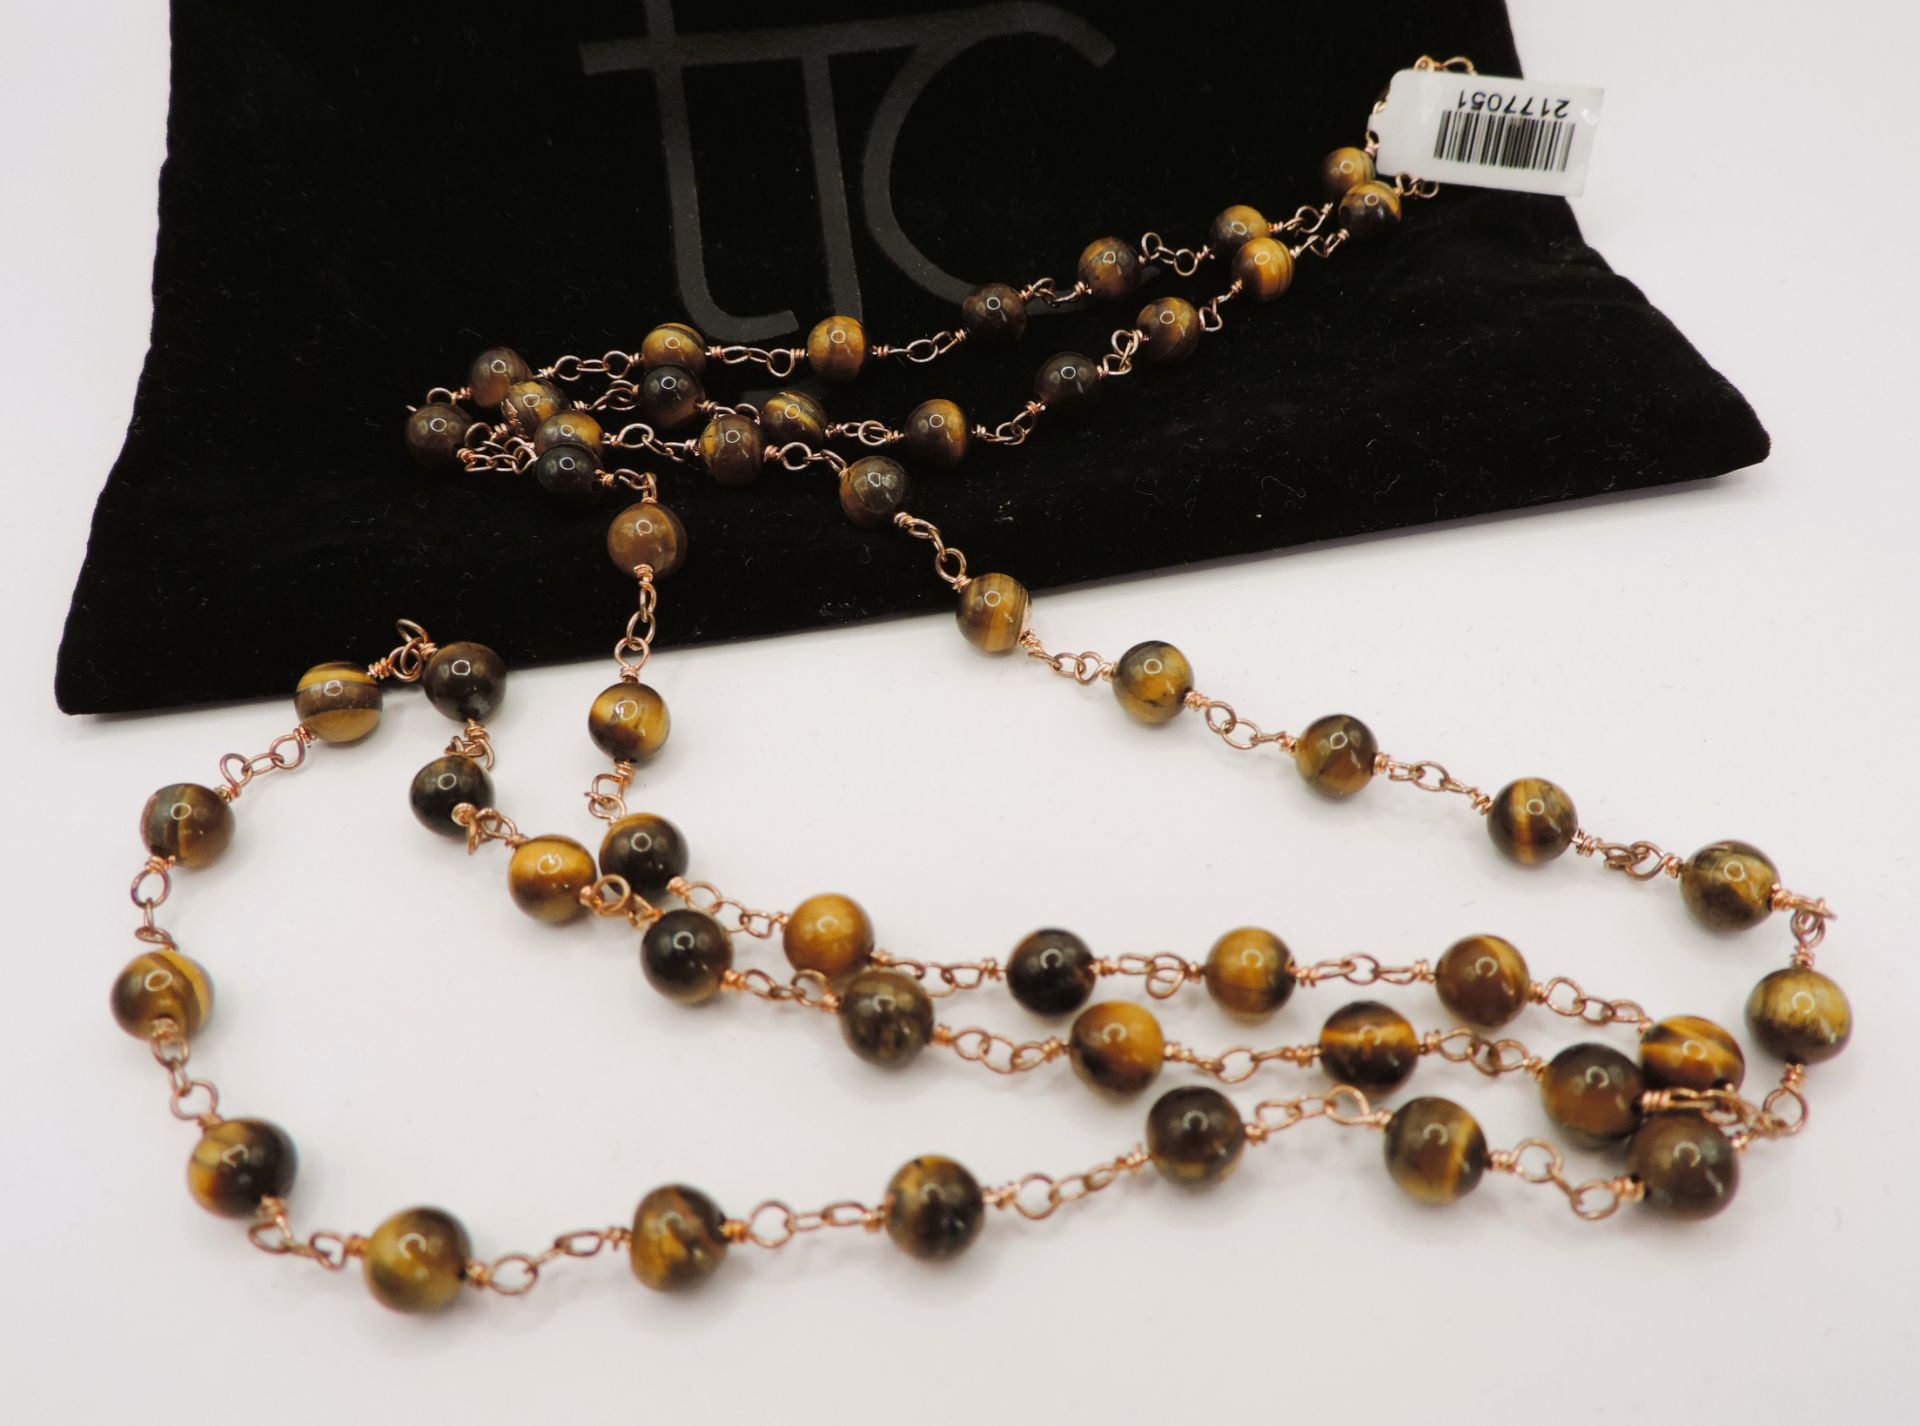 Tigers Eye Gemstone Chain Necklace 32 inches New with Gift Pouch - Image 4 of 4